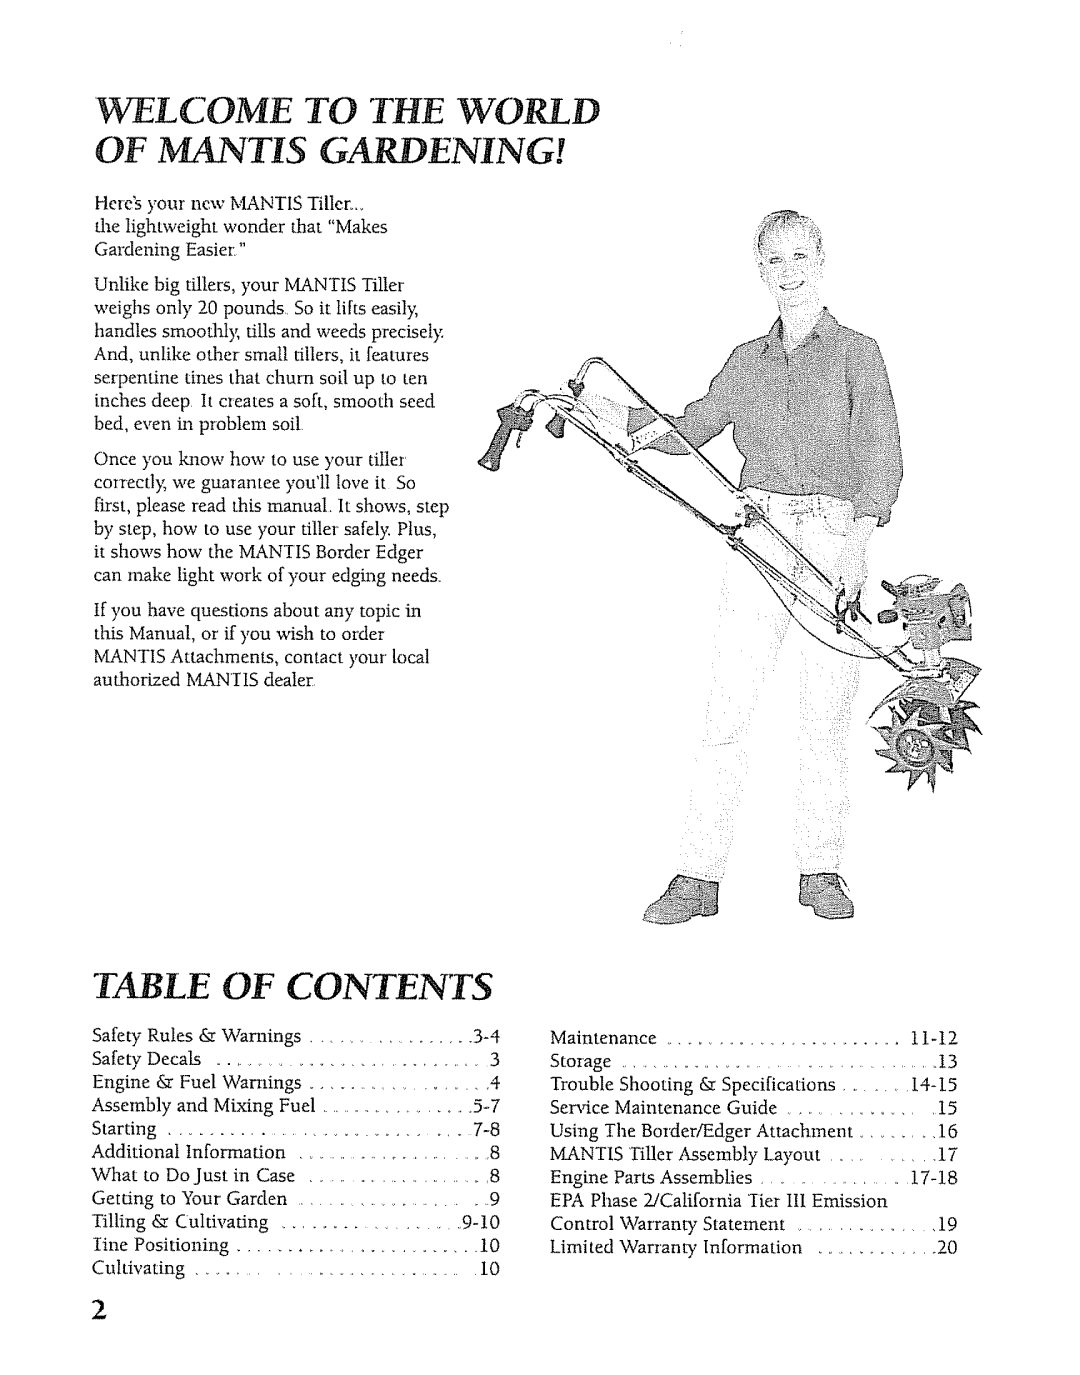 Mantis SV-5C/2 manual Table Of Contents, Welcome To The World, Of Mantis Gardening 